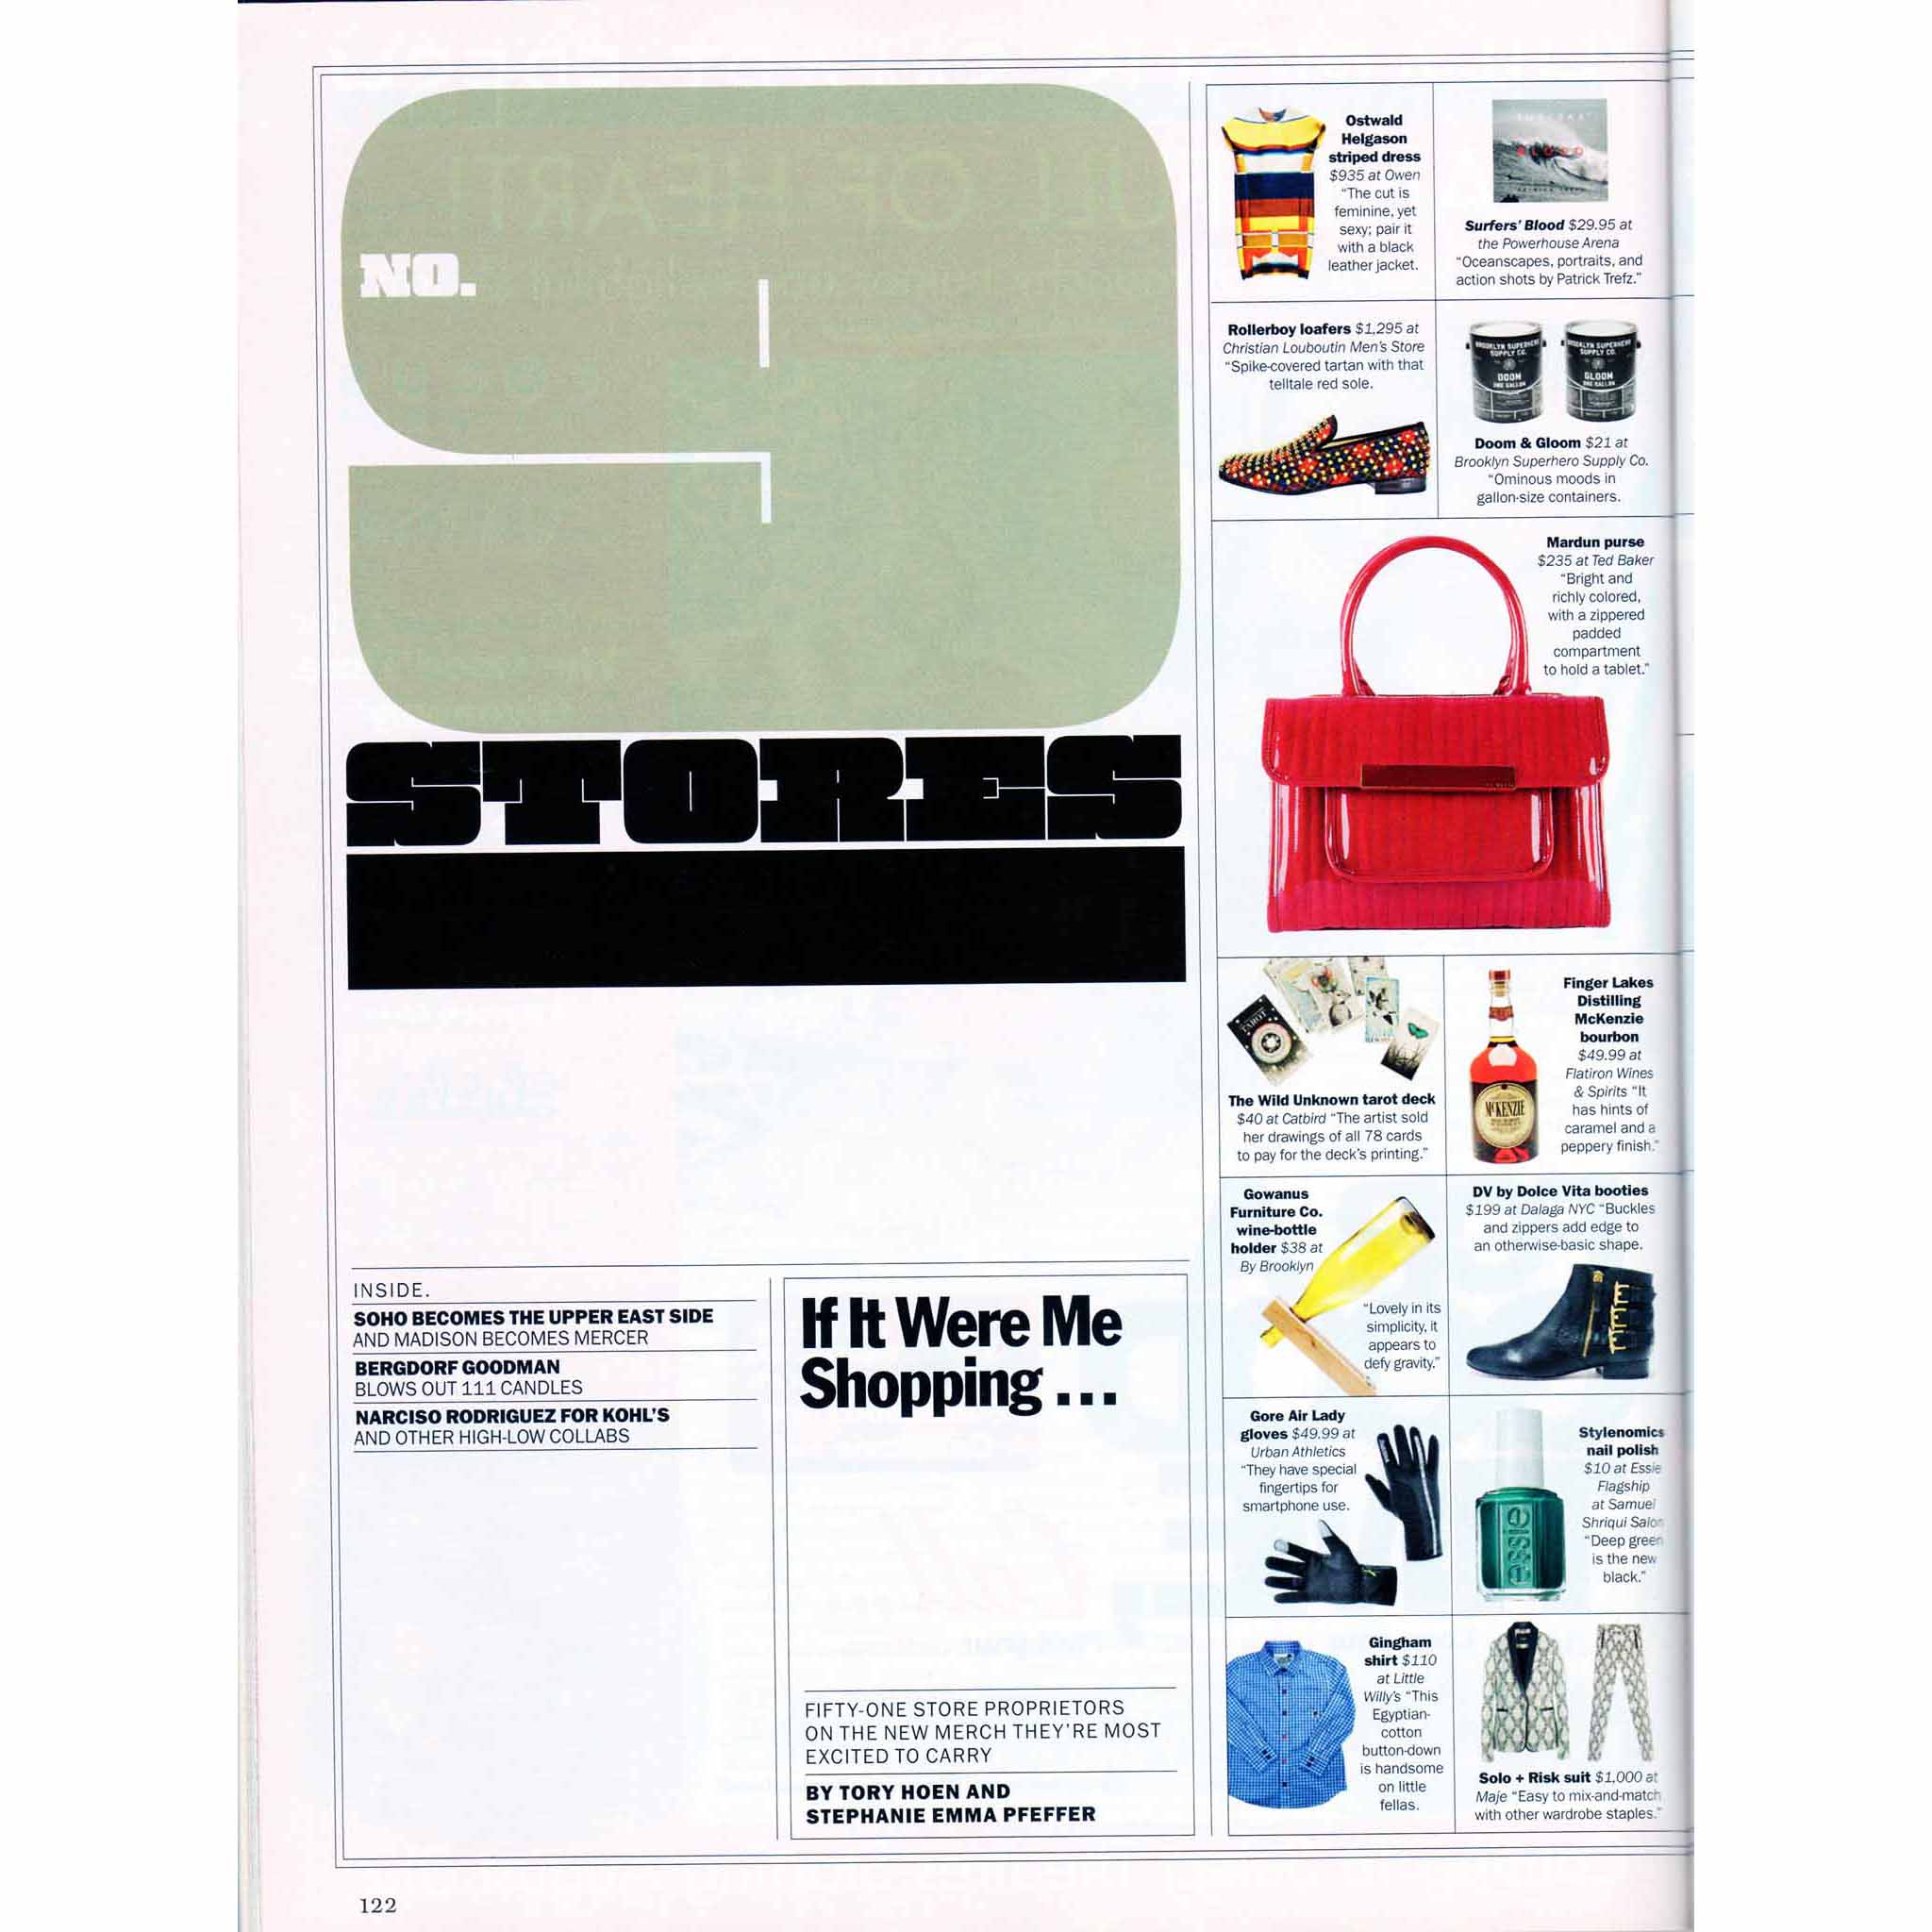 New York Magazine, Fall Preview 2012: If It Were Me Shopping, August 27 – September 3, 2012, pages 122-23.